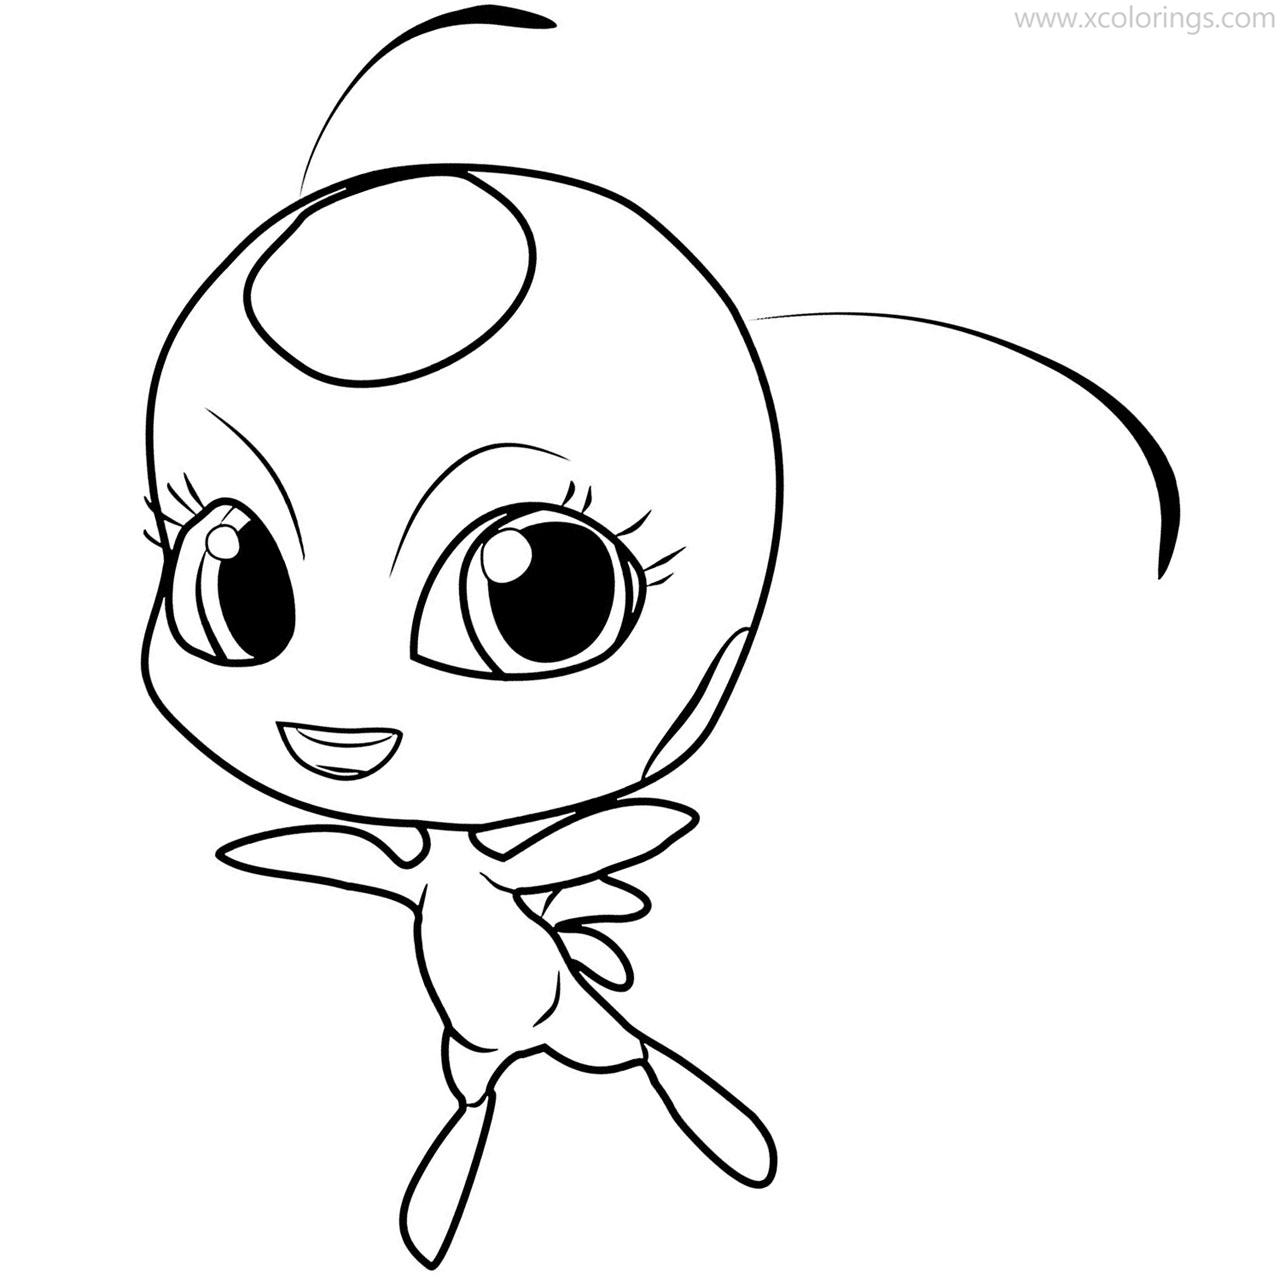 Hero Miraculous Ladybug Coloring Pages - XColorings.com